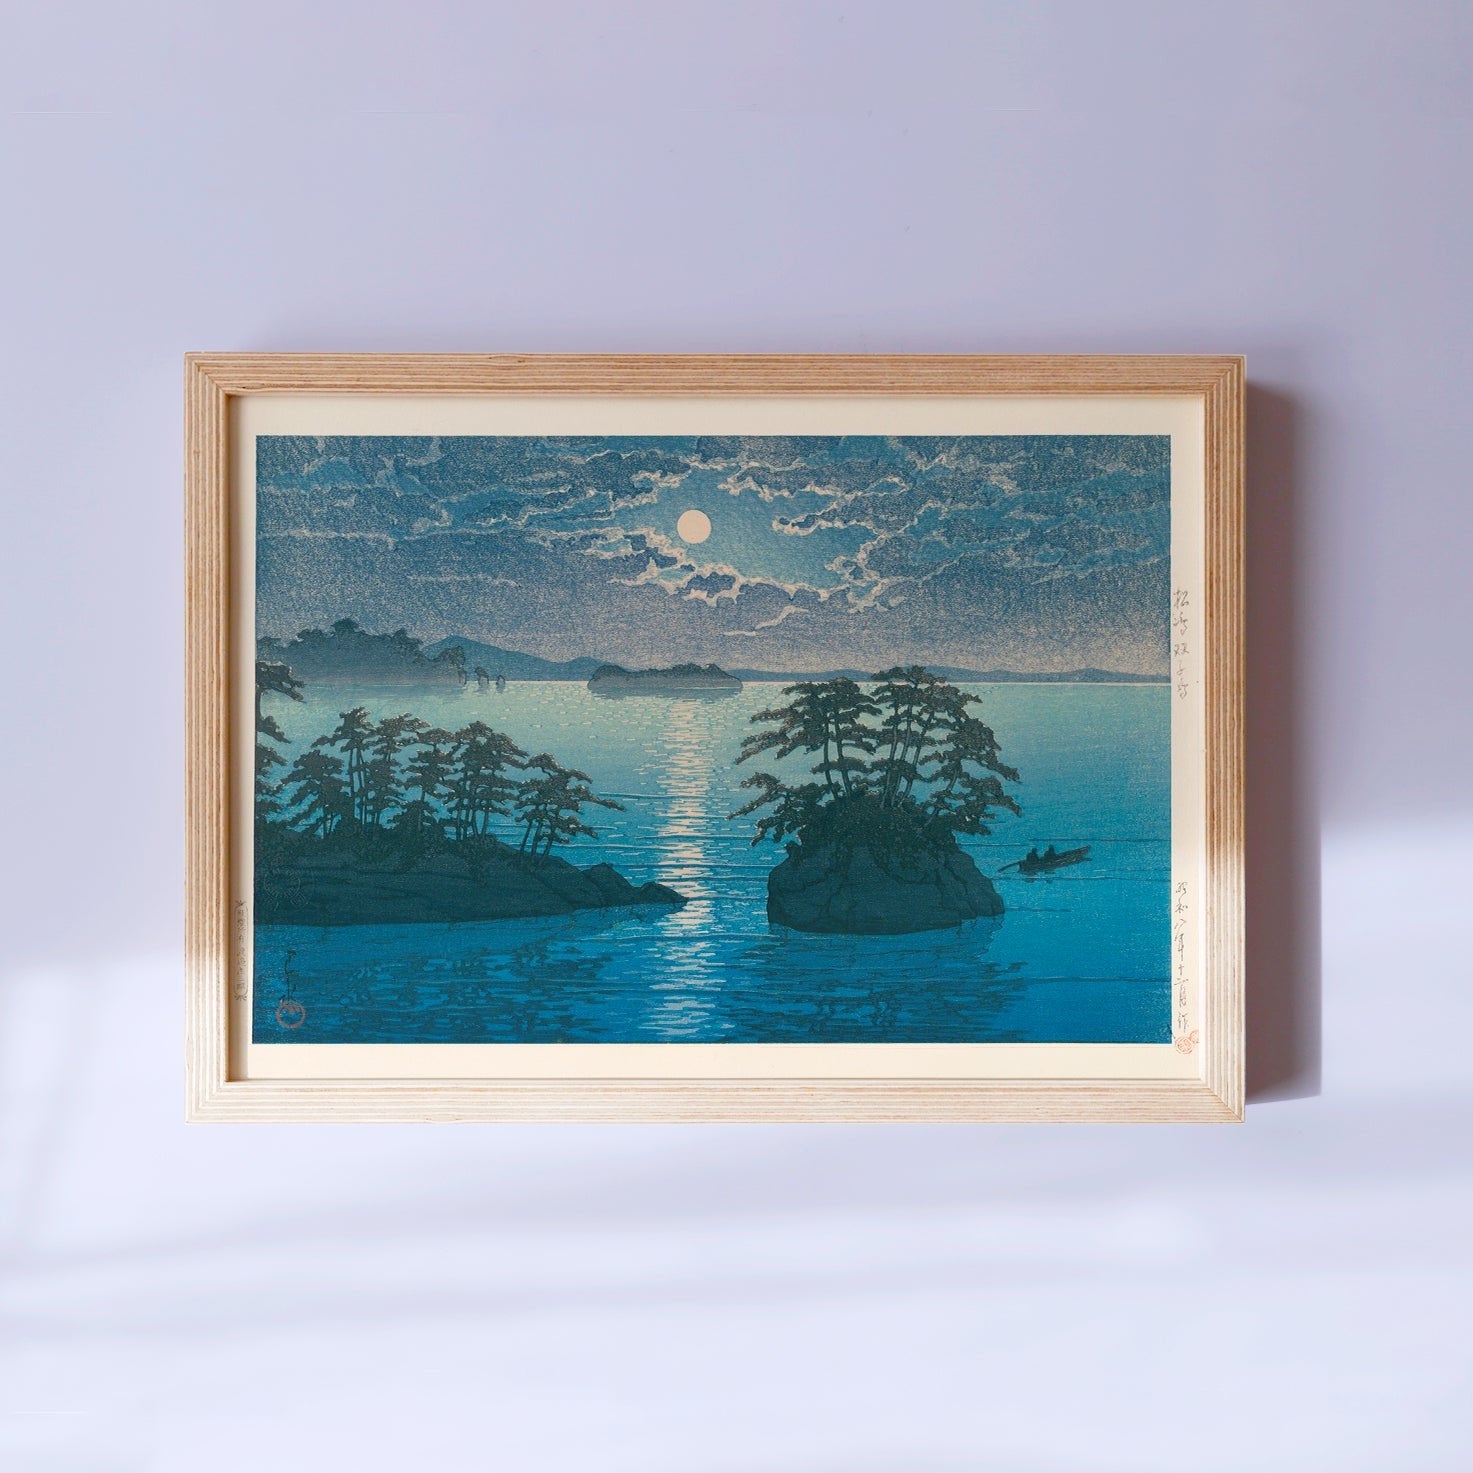 Framed Japanese Art Poster by Kawase Hasui, featuring a serene moonlit night with small islands on the sea